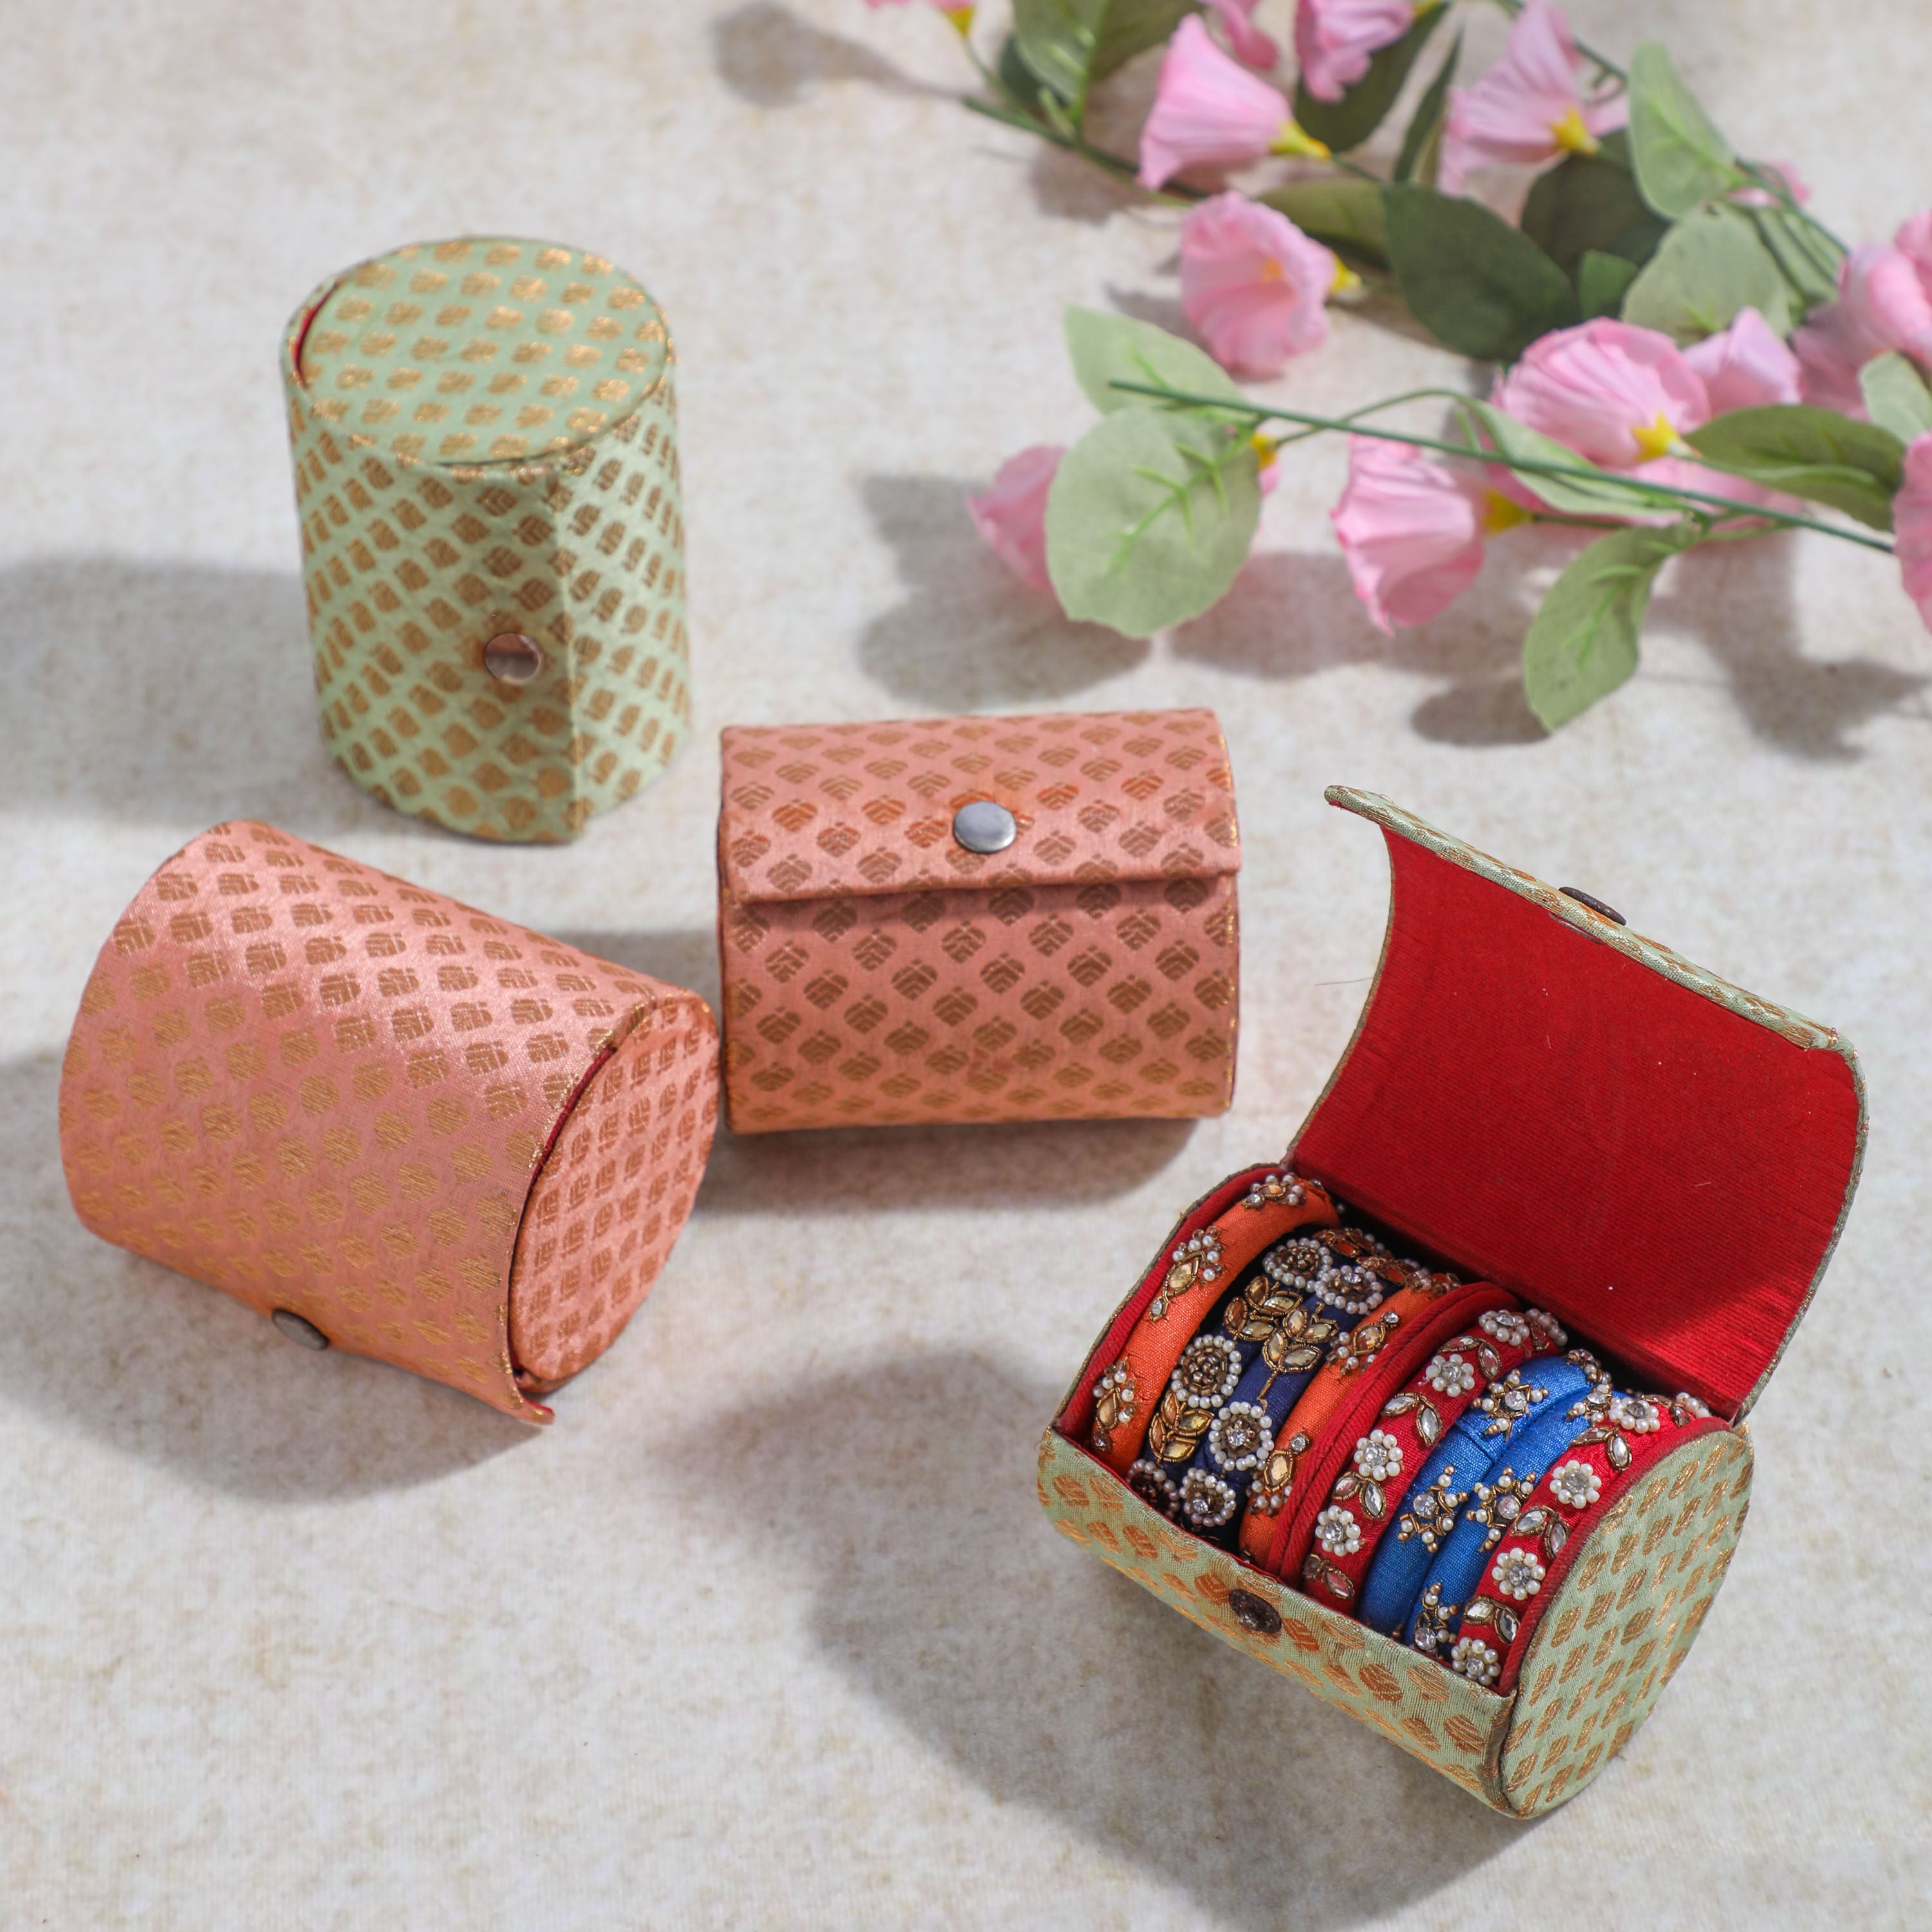 Bangle Case for gifting at Weddings and Indian Pooja Ceremonies